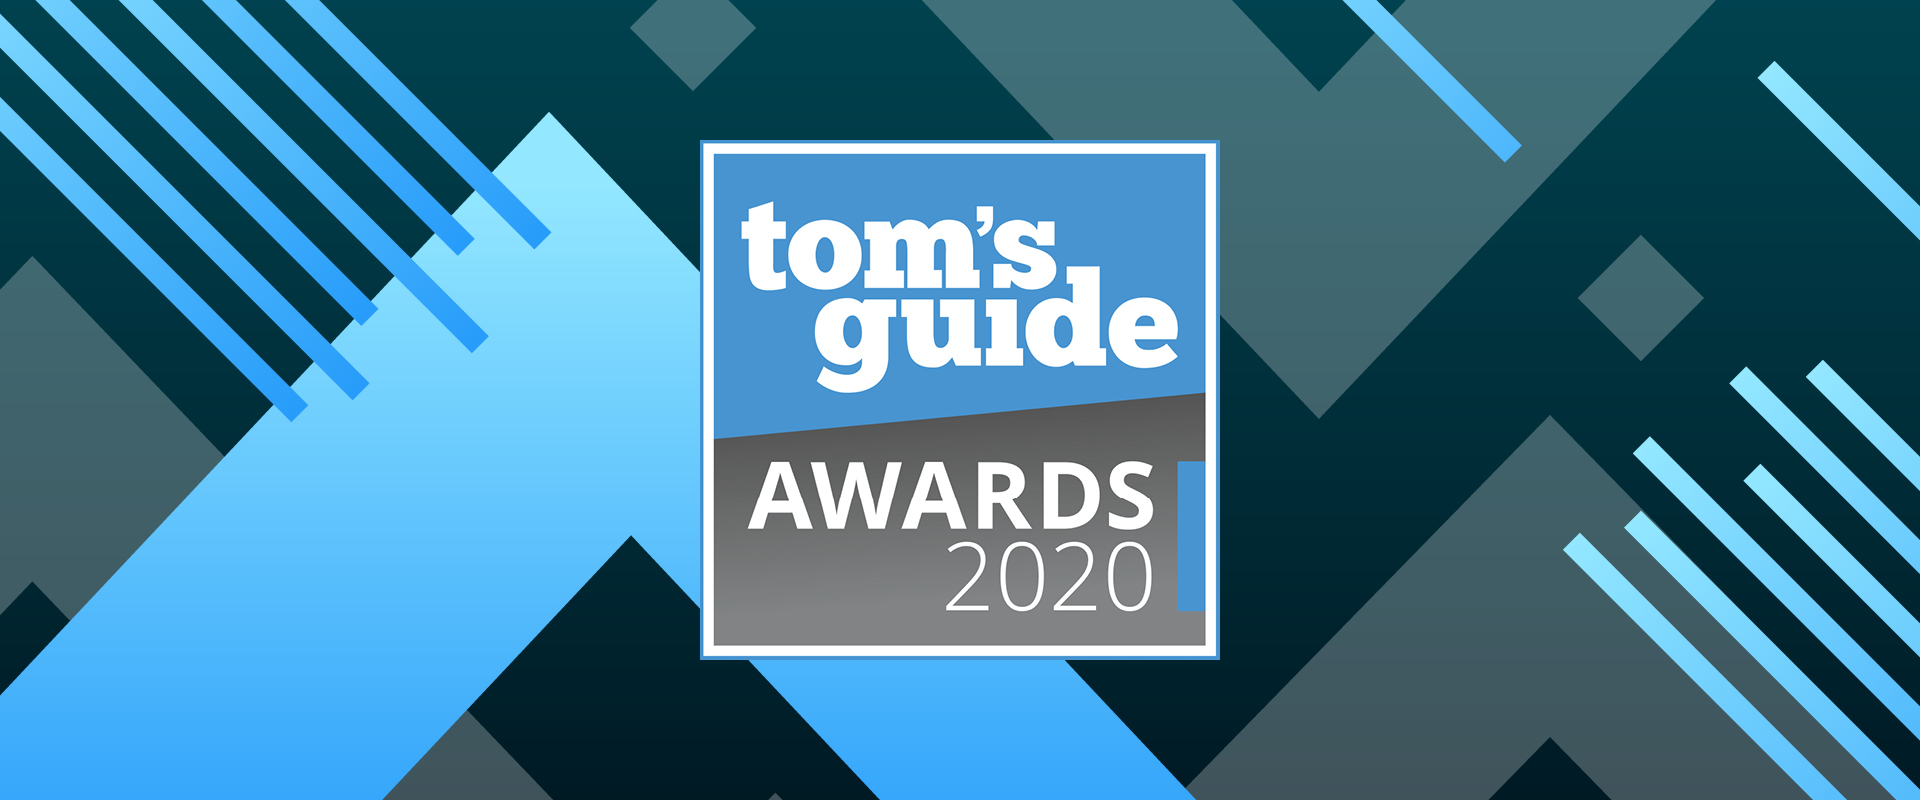 Tom S Guide Awards 2020 Here Are The Nominees Tom S Guide